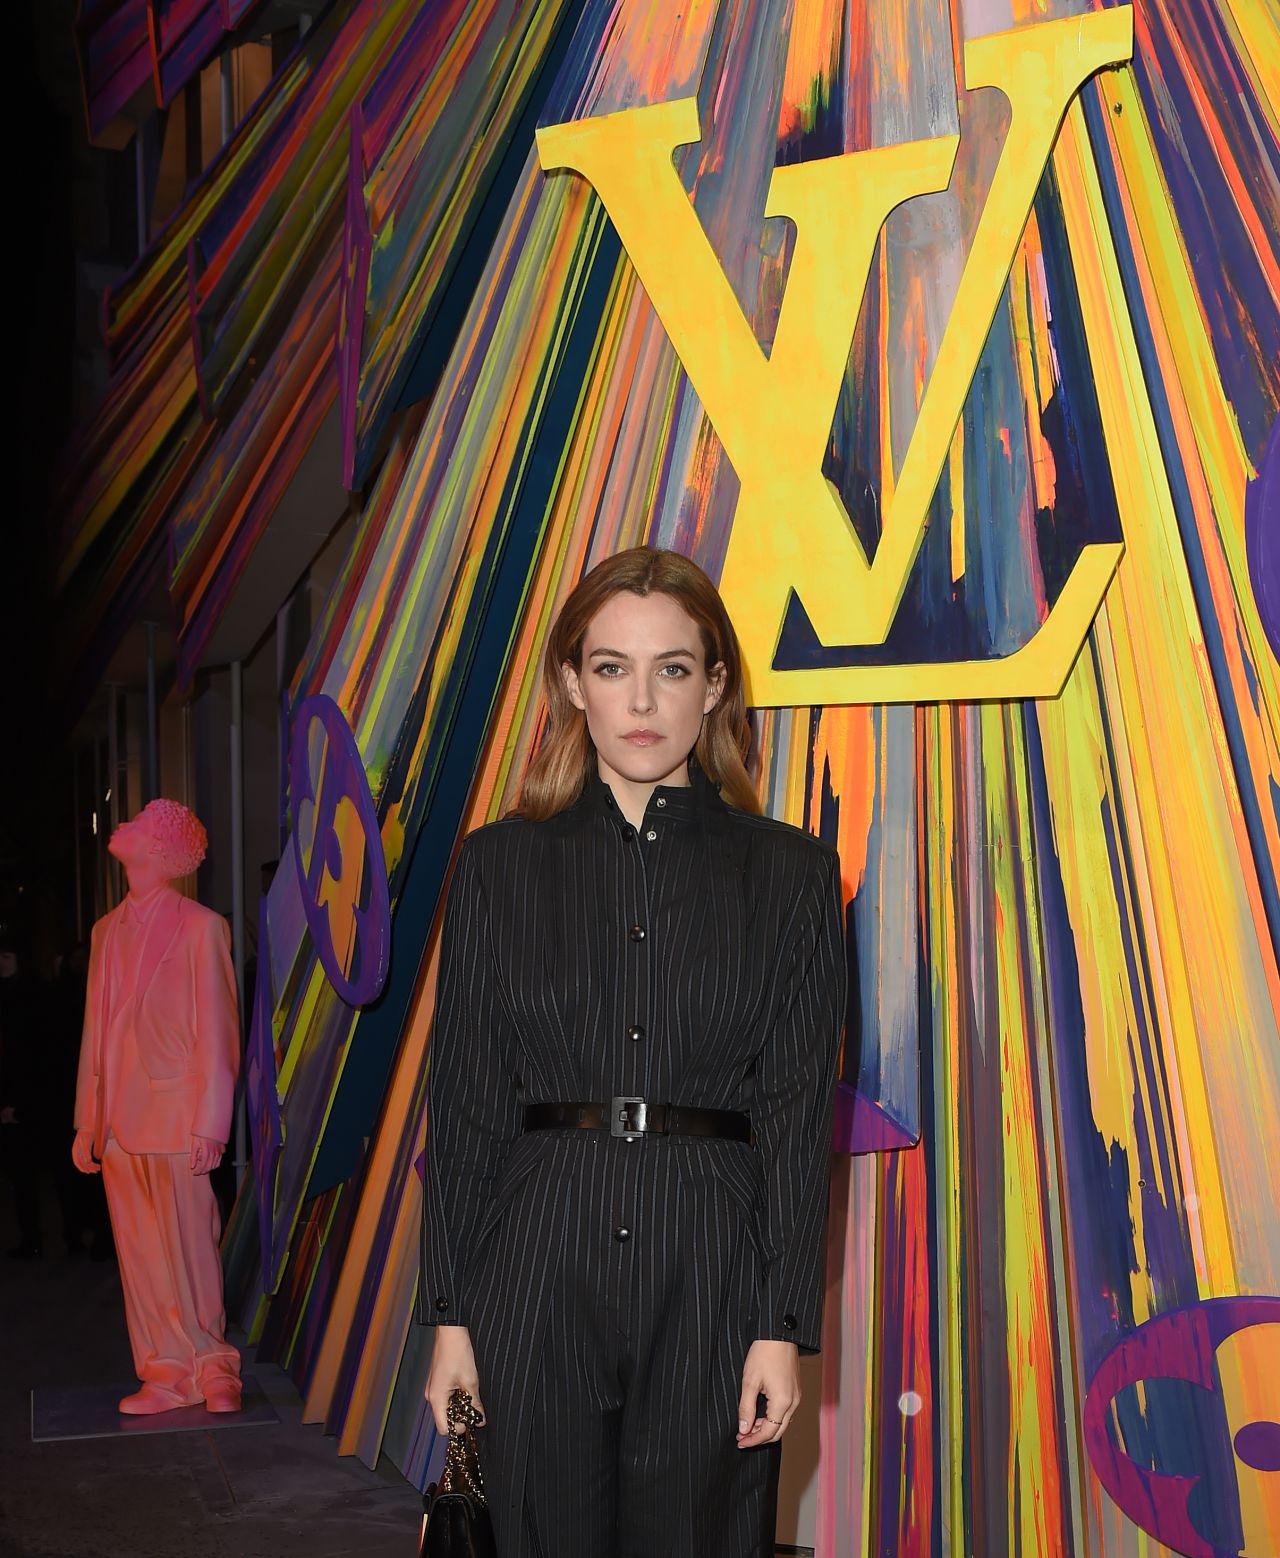 Riley Keough Louis Vuitton Cruise Fashion Show May 8, 2019 – Star Style